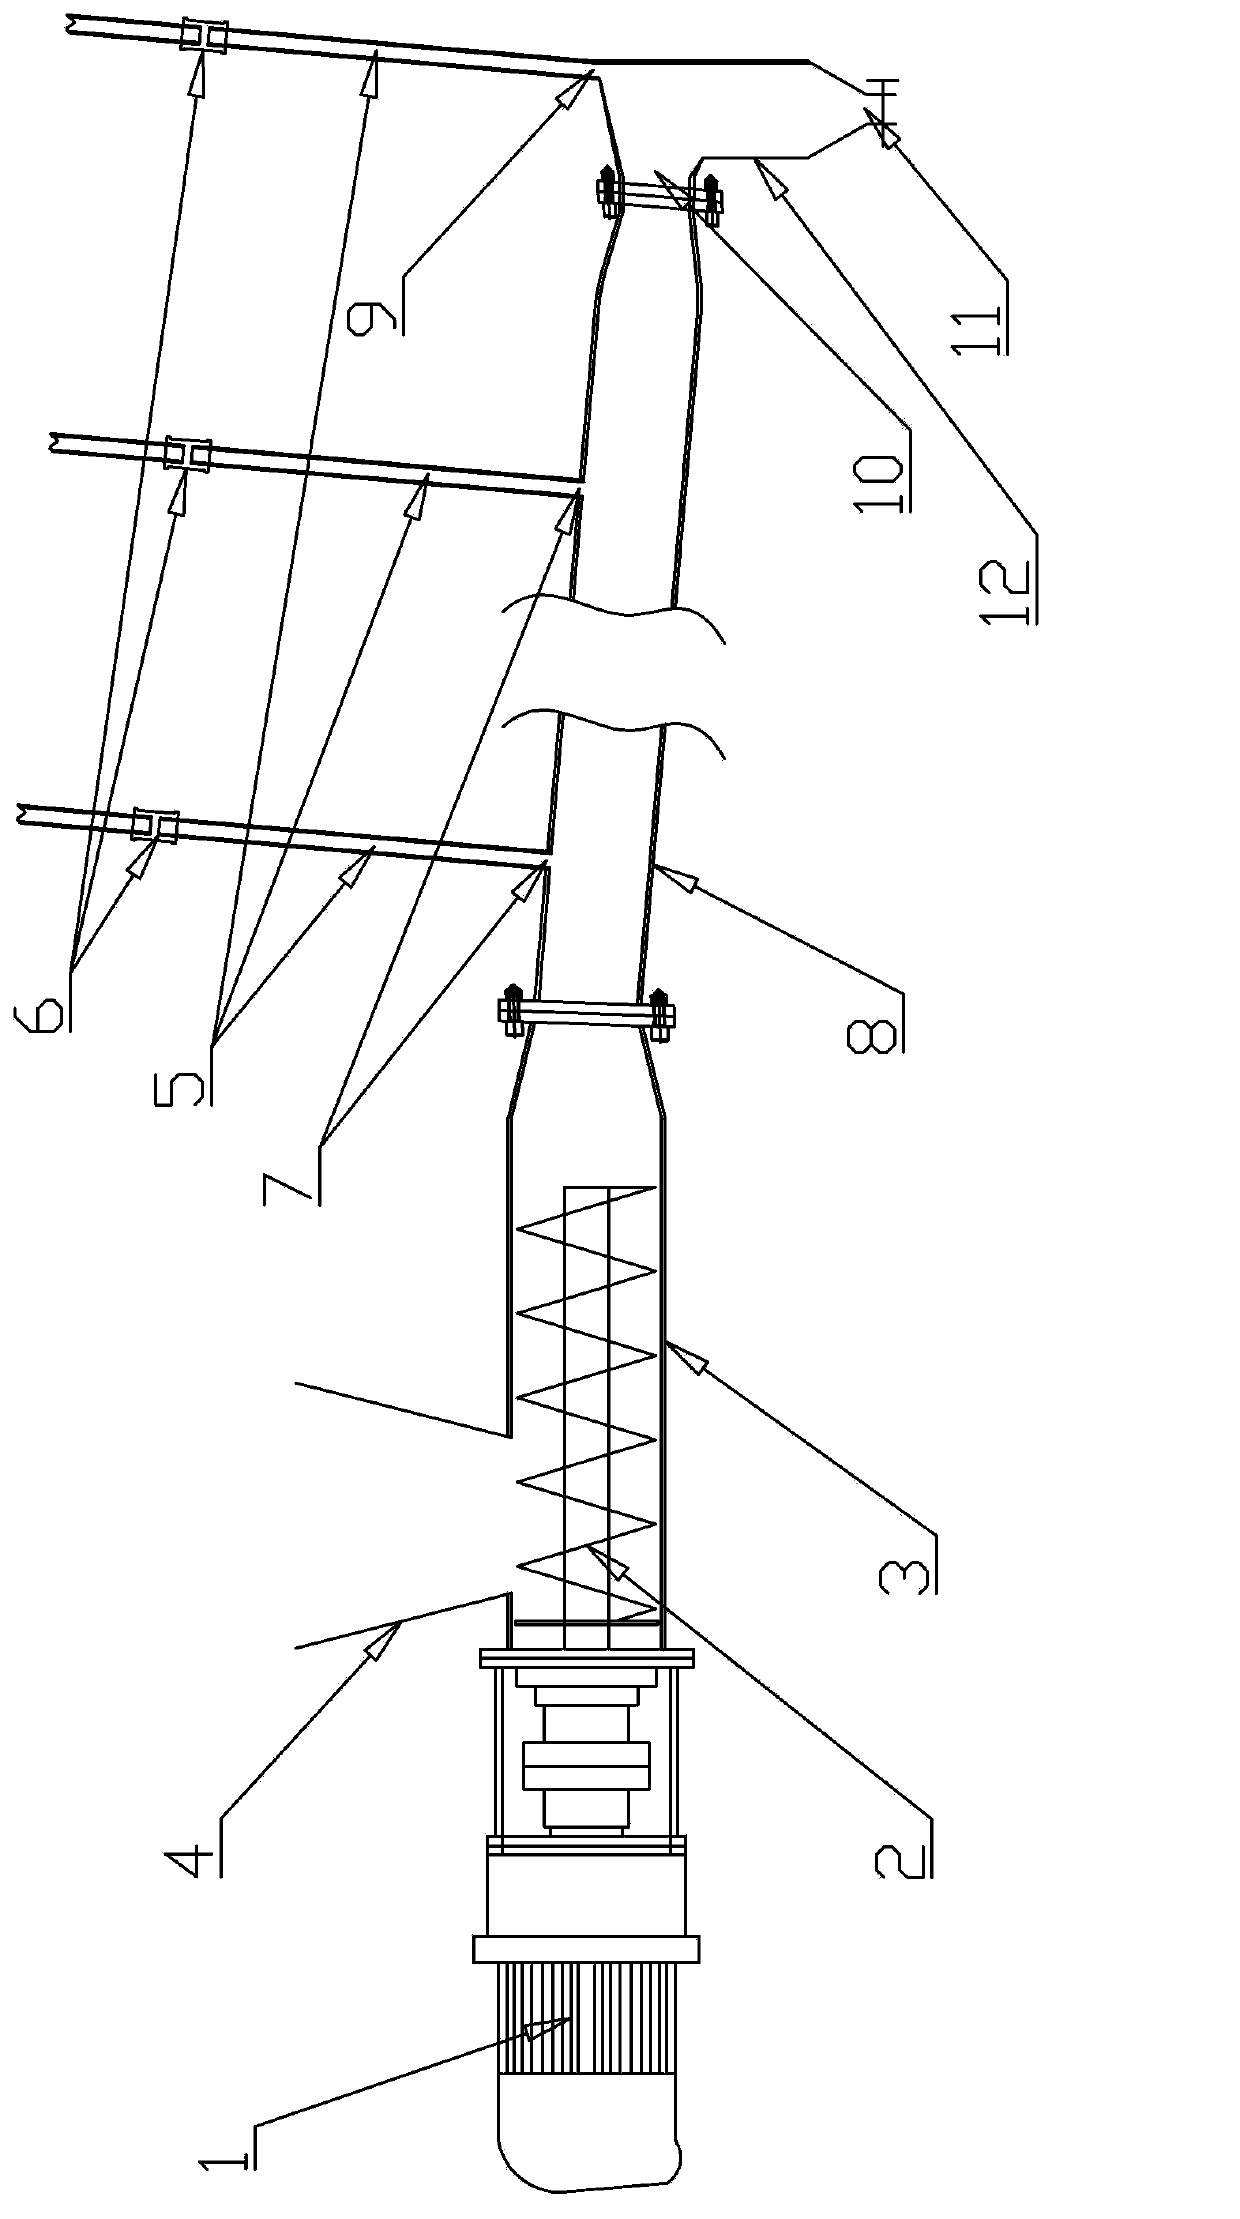 Semi-spiral oblique continuous-charring material-conveying apparatus